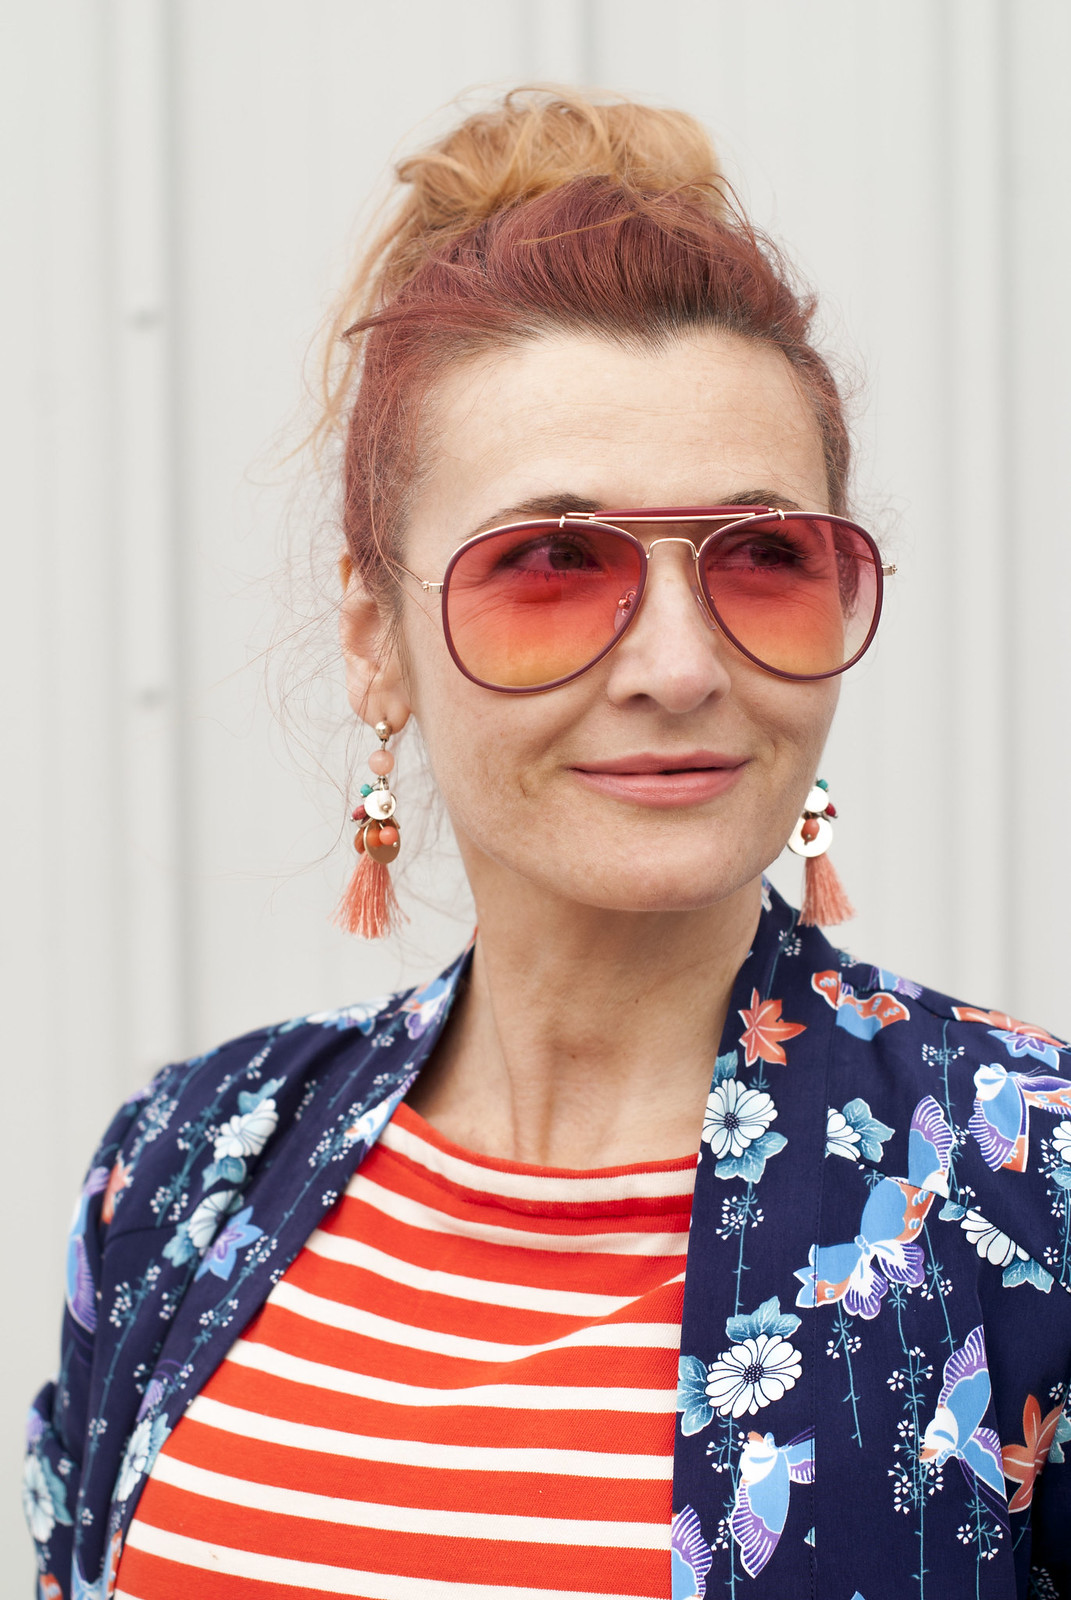 Summer style mixed stripes and florals: Blue floral pyjama-style top orange stripe Breton top wide leg denim trousers orange lace-up ghillie shoes orange-tinted aviators yellow ochre hobo bag | Not Dressed As Lamb, over 40 style